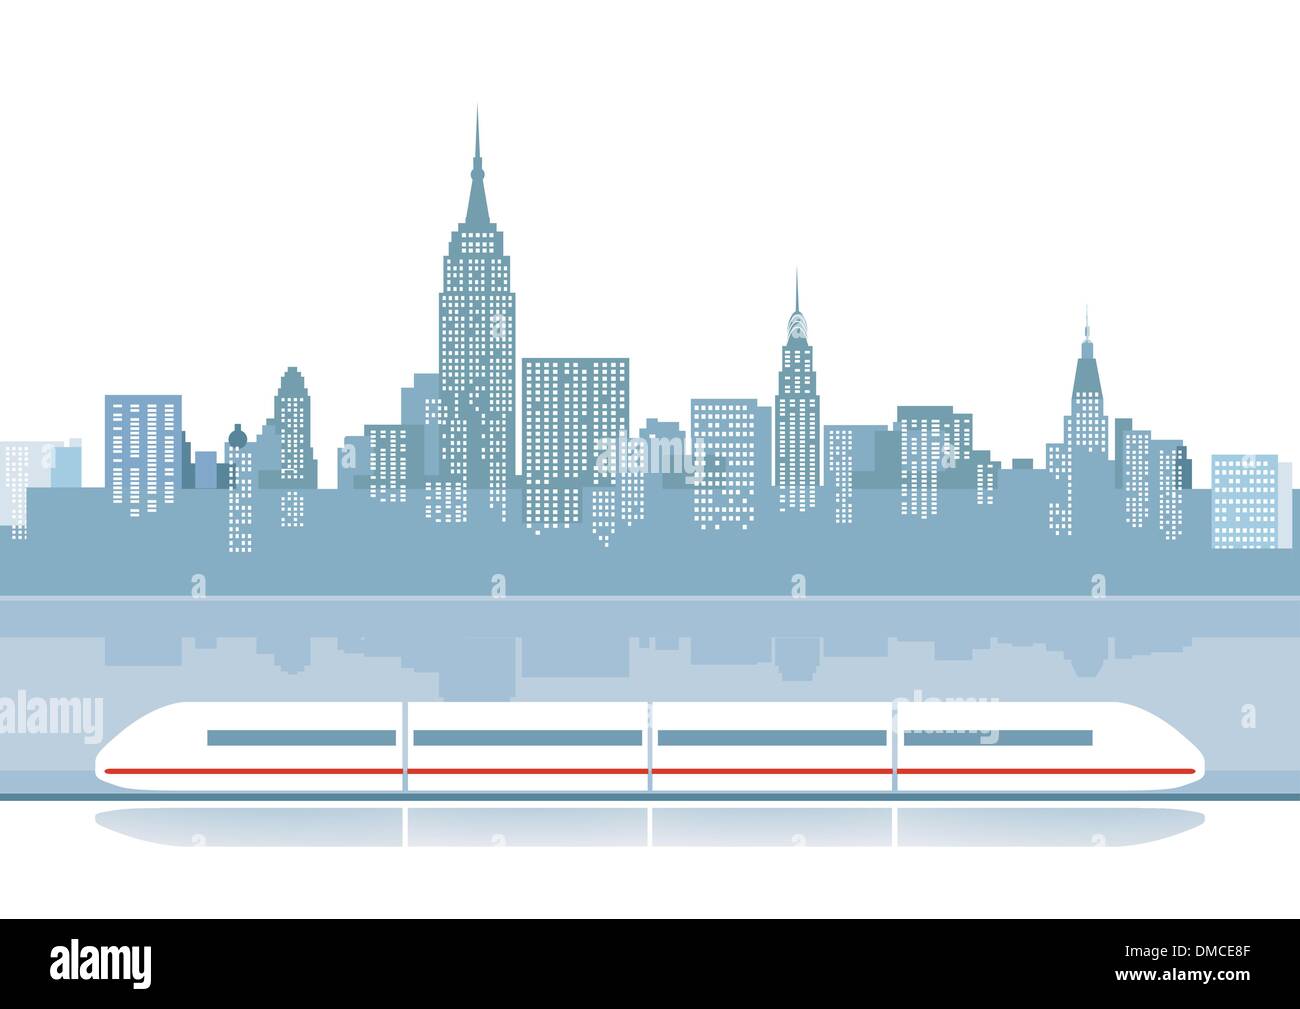 Express train from the city backdrop Stock Vector